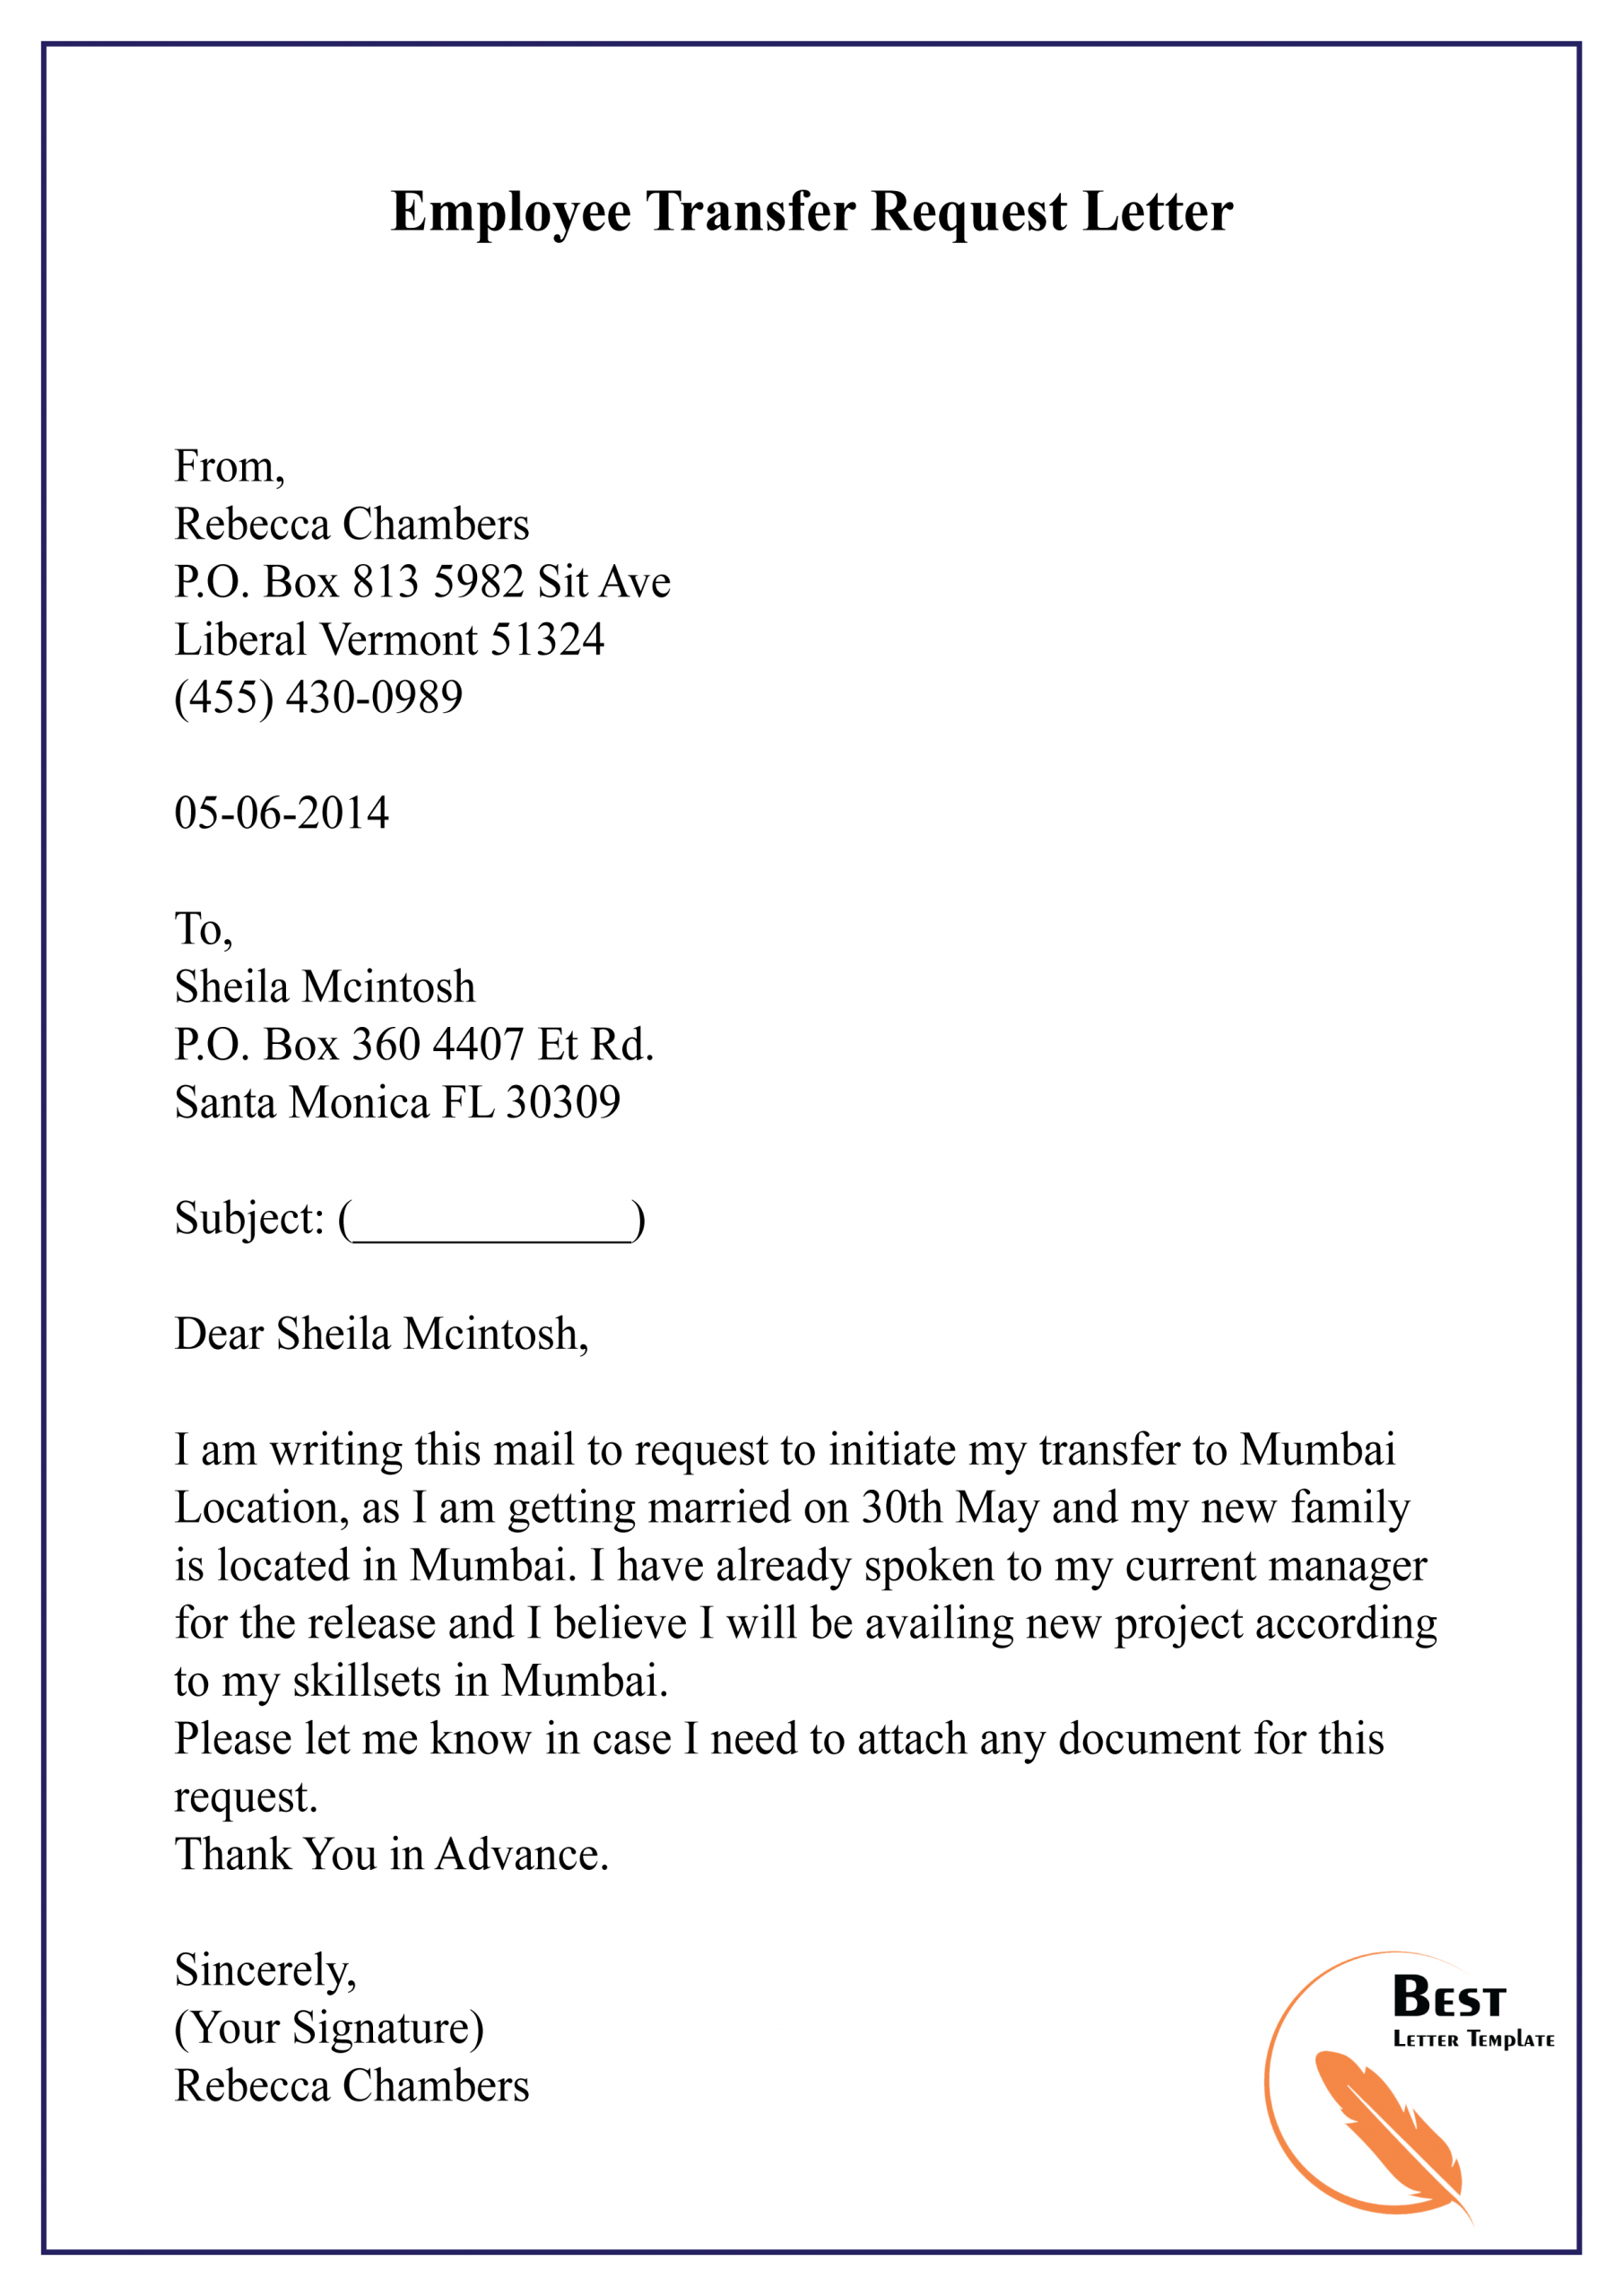 Employee Transfer Request Letter 01 Best Letter Template with regard to sizing 2480 X 3508